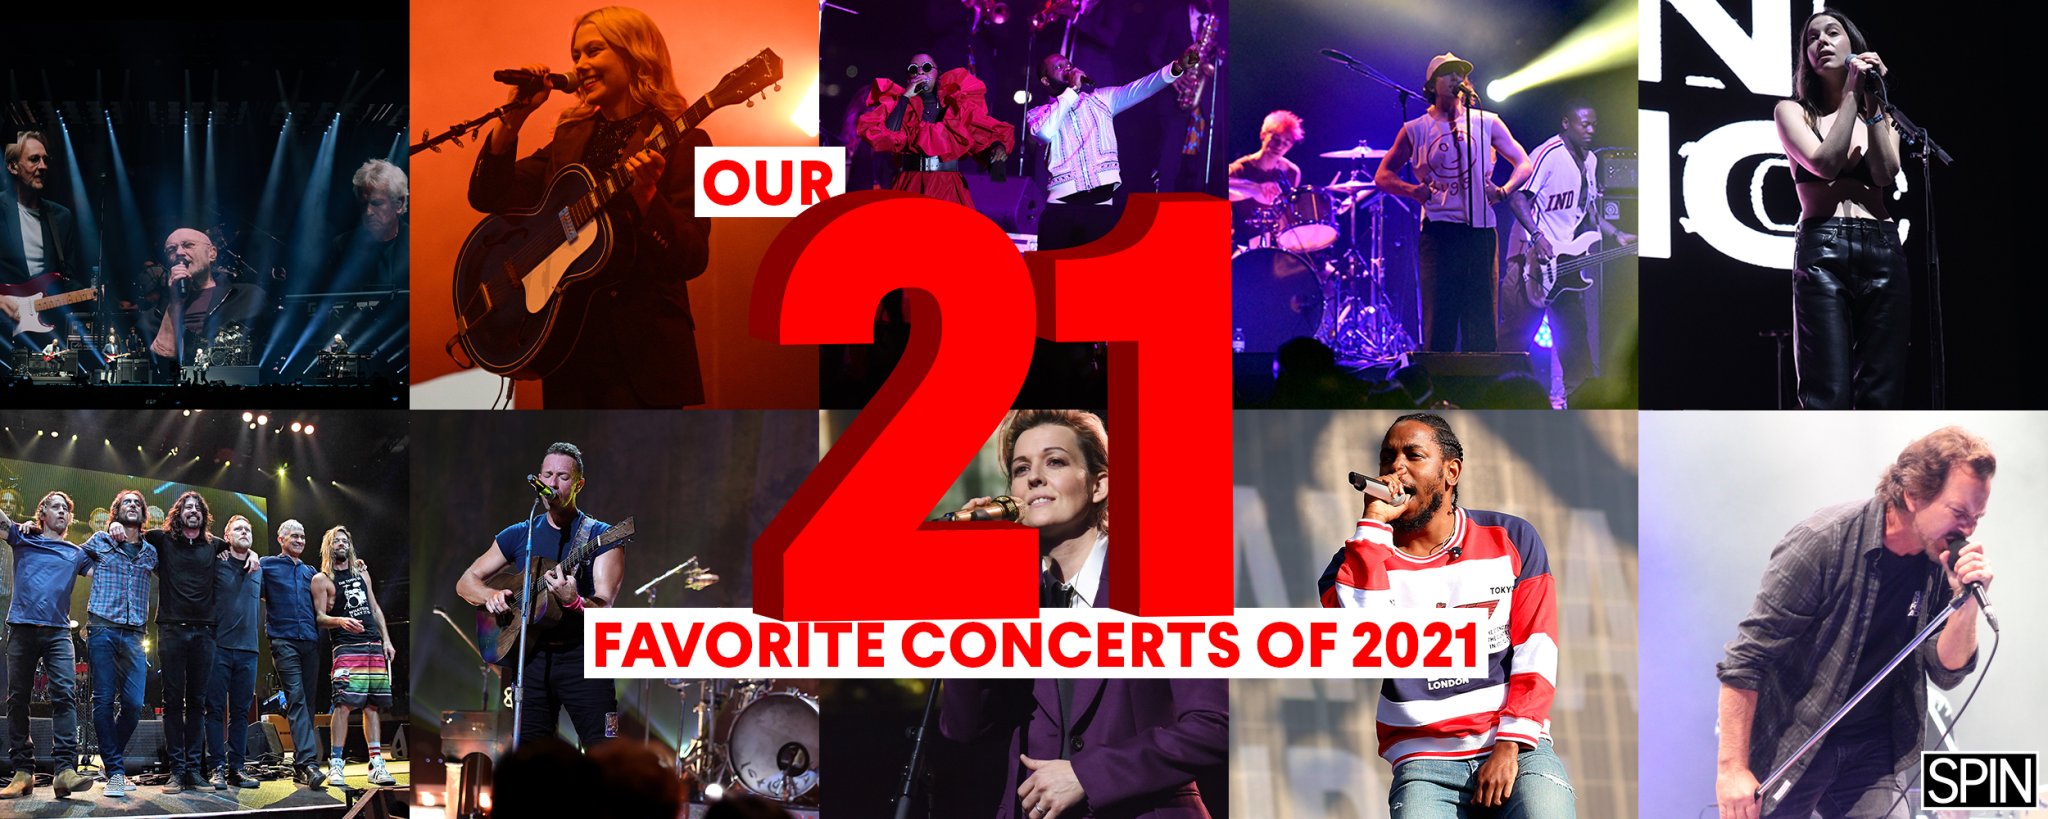 Our 21 Favorite Concerts of 2021